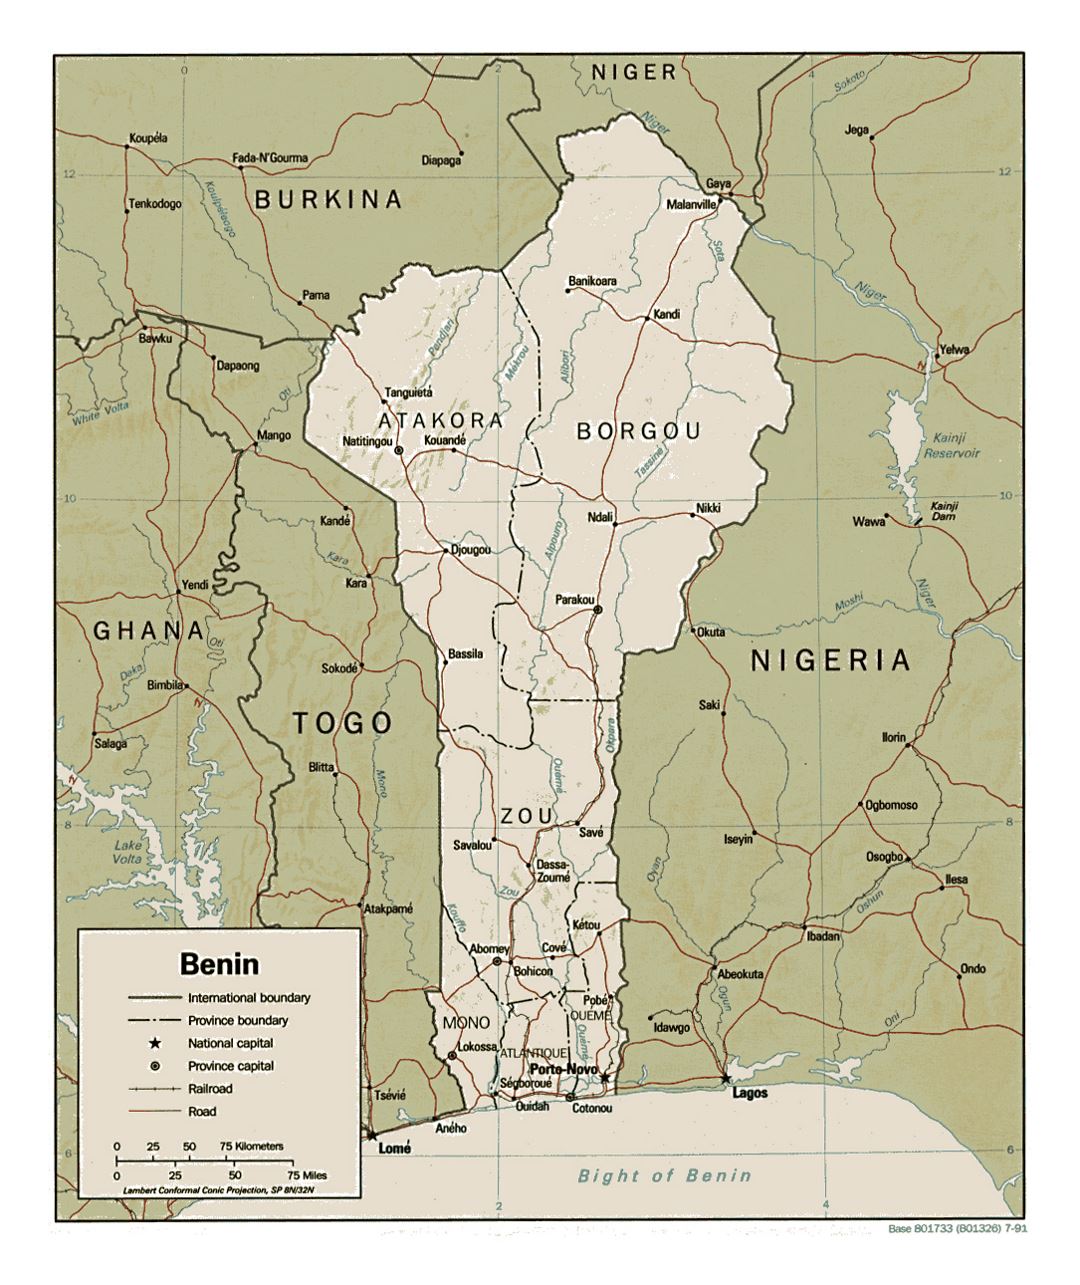 Detailed political and administrative map of Benin with relief, roads, railroads and major cities - 1991